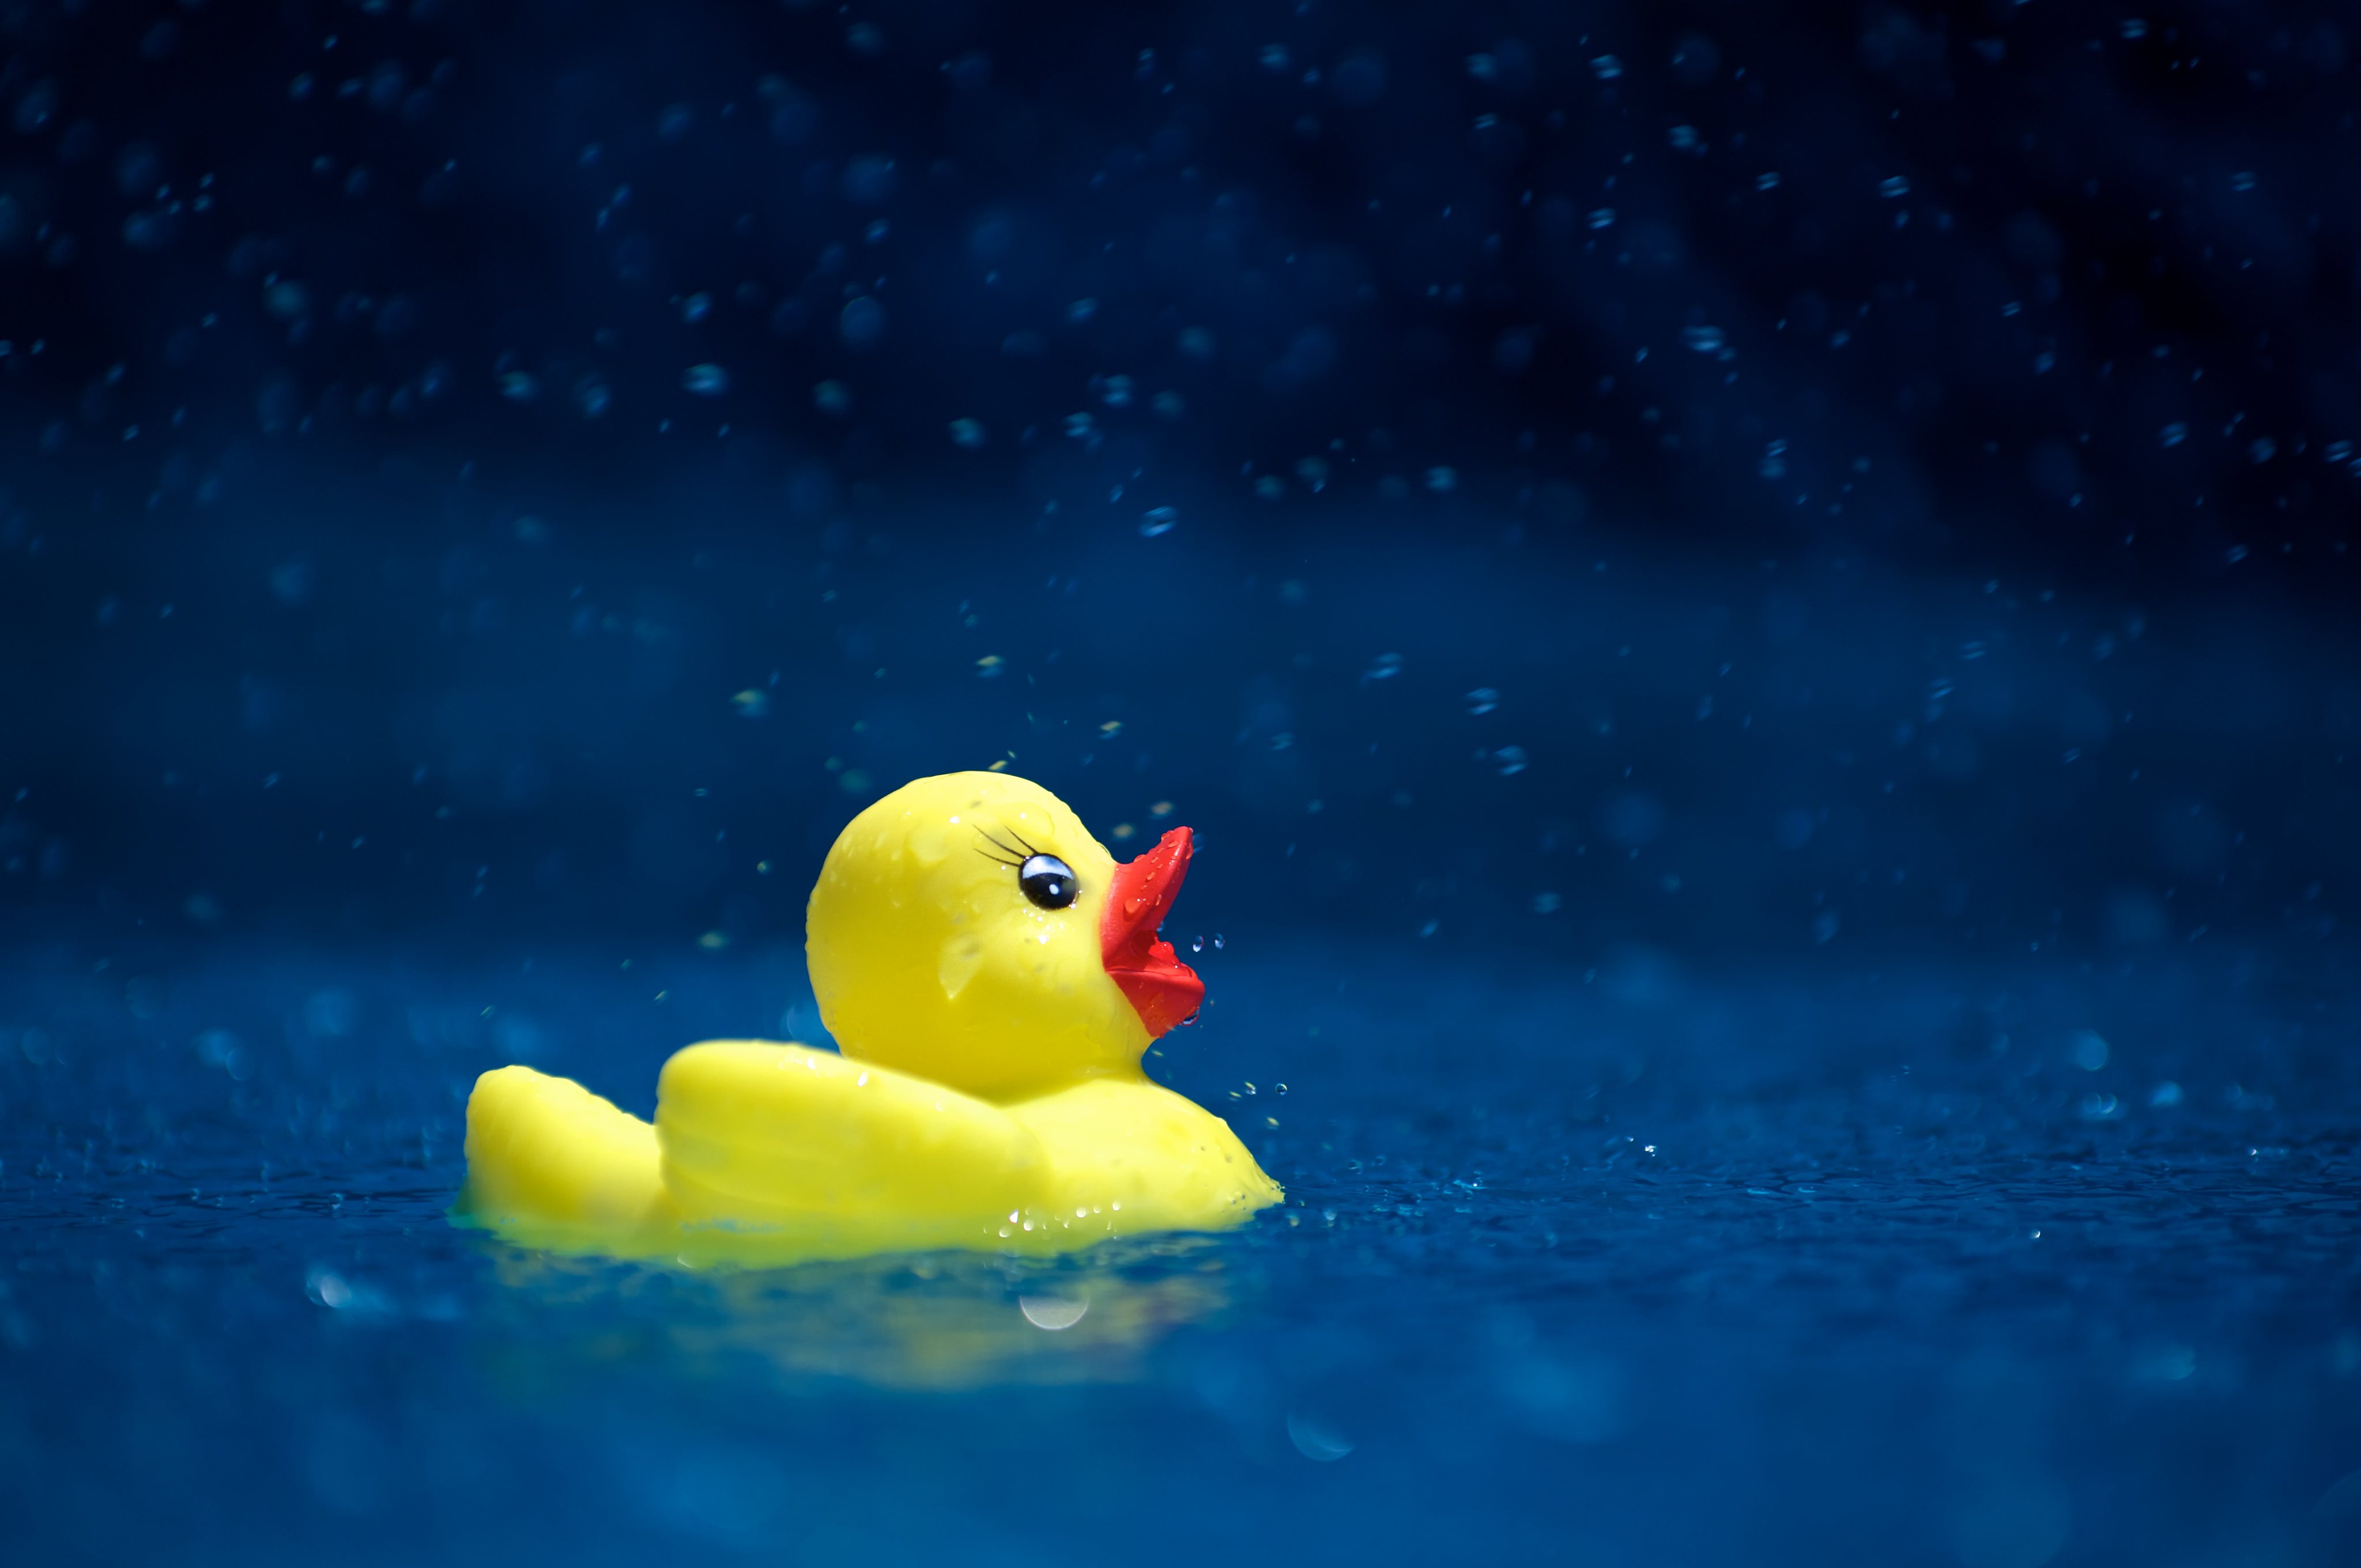 toy, drops, water, miscellanea, miscellaneous, spray, duckling phone wallpaper